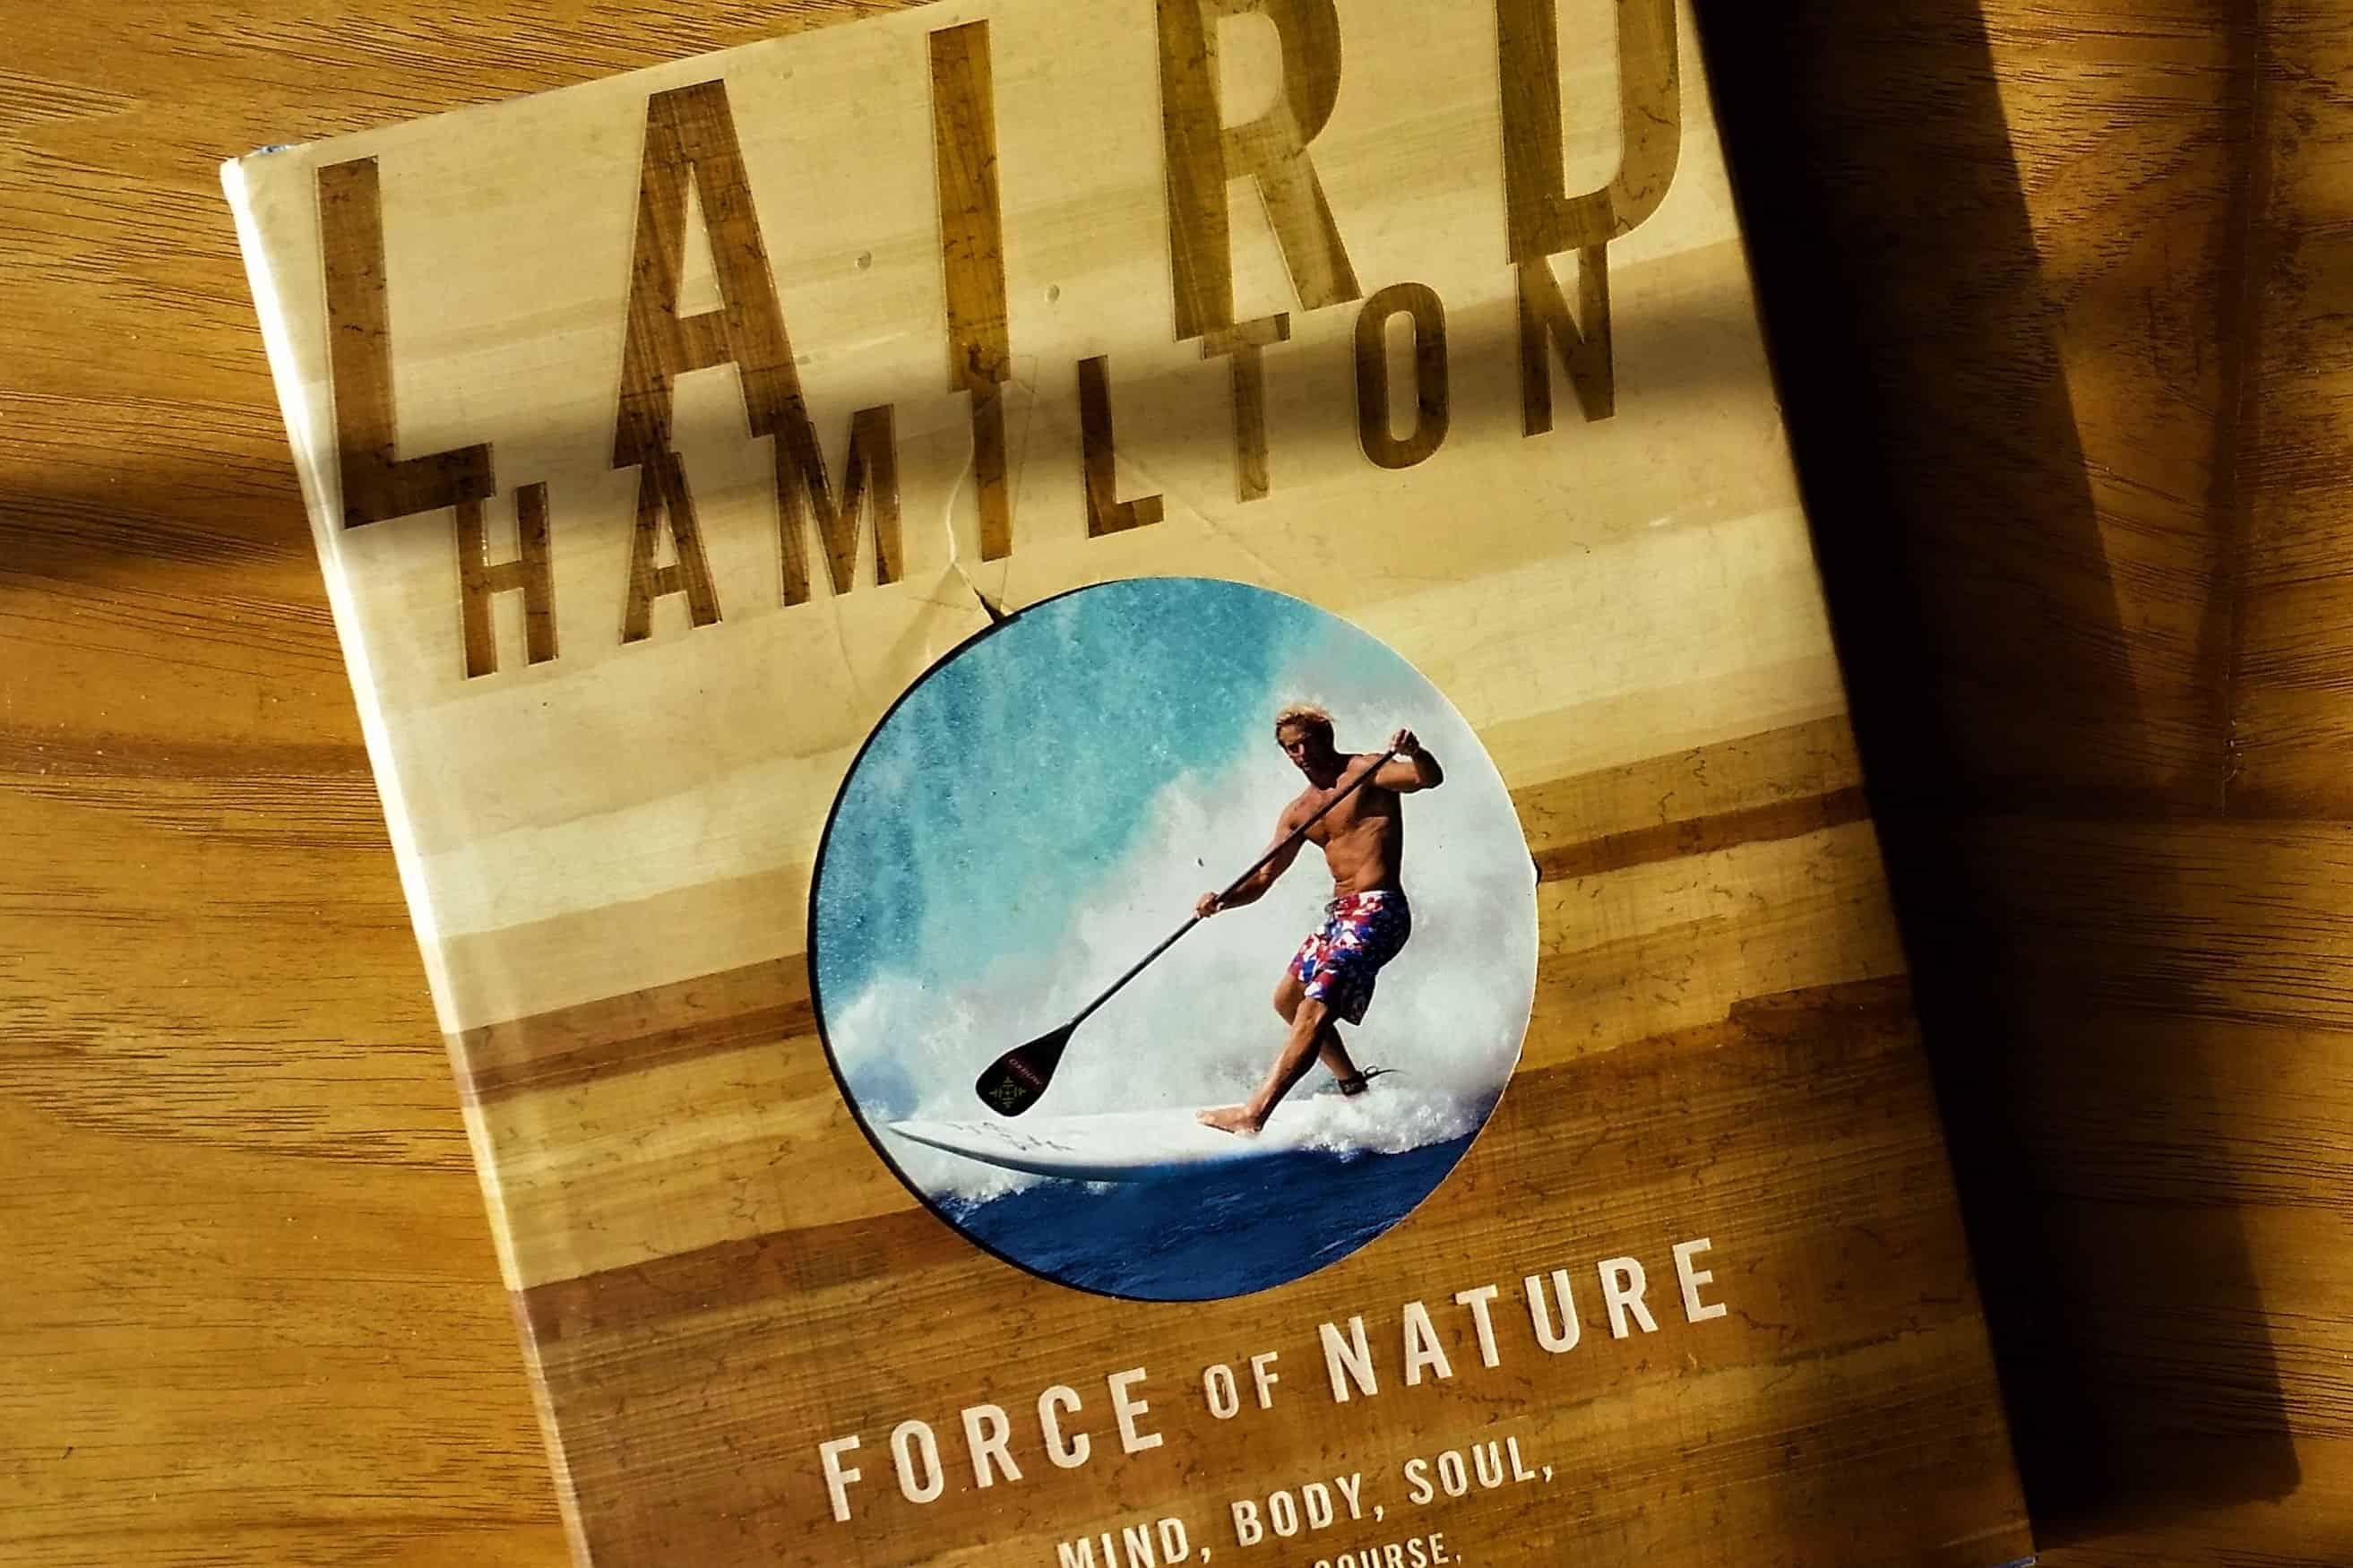 Force of Nature Laird Hamilton Surfing Books